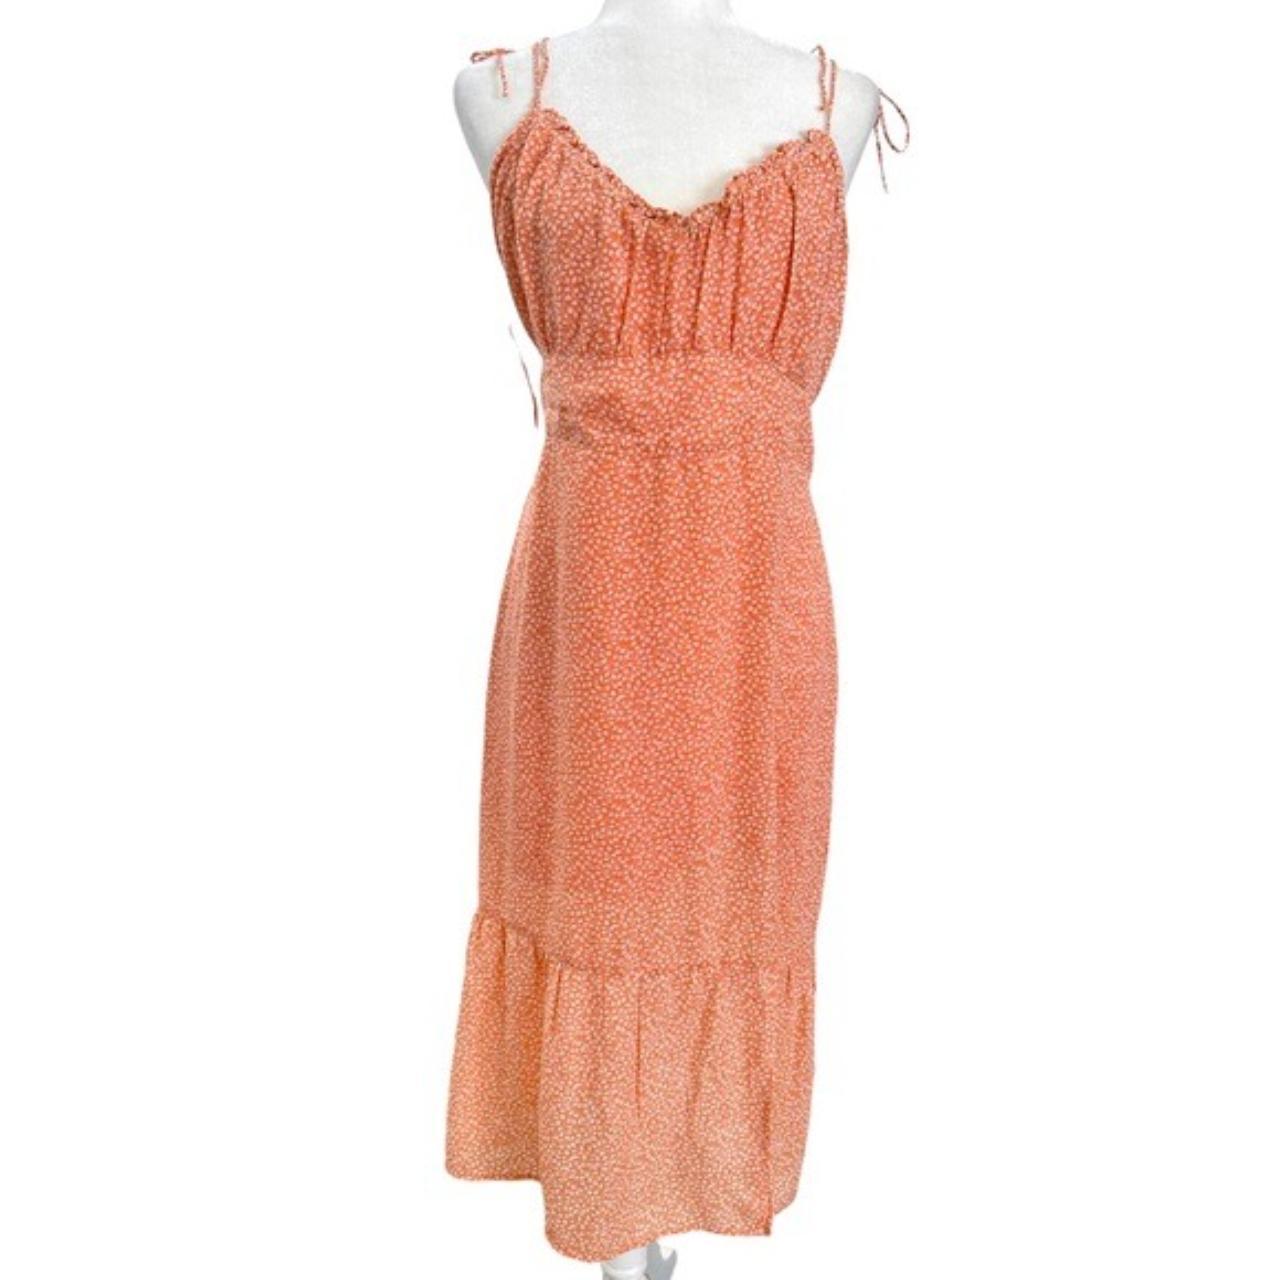 Abercrombie & Fitch Women's Orange and Pink Dress | Depop